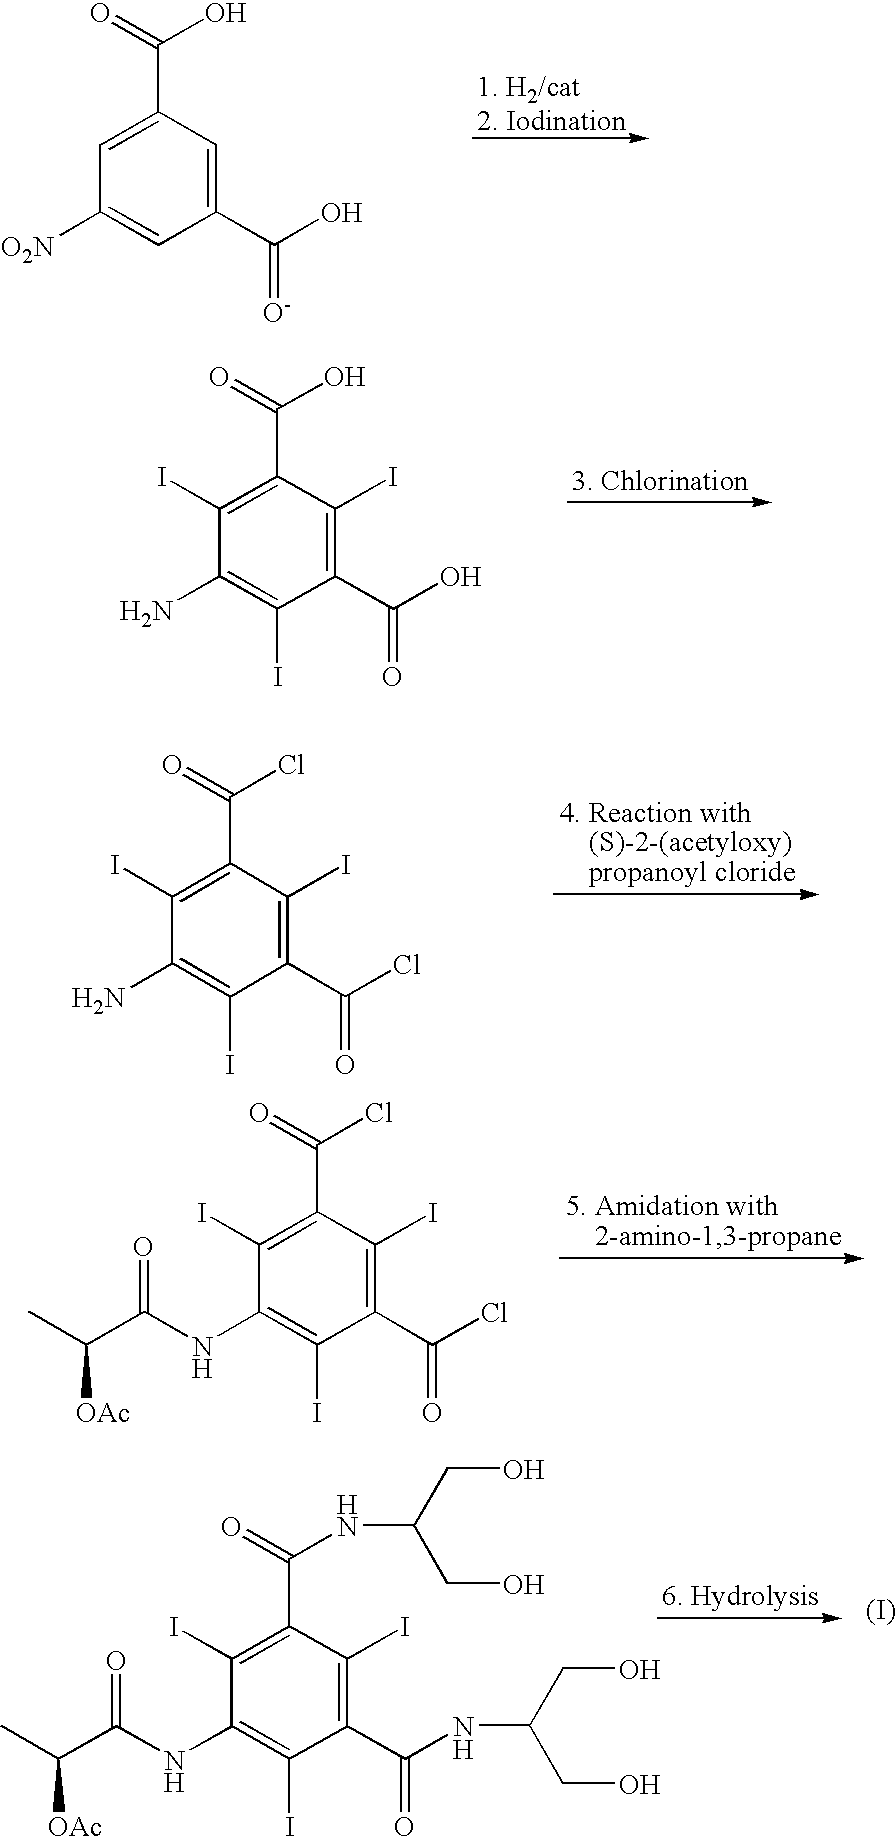 Process for the preparation of iopamidol and the new intermediates therein